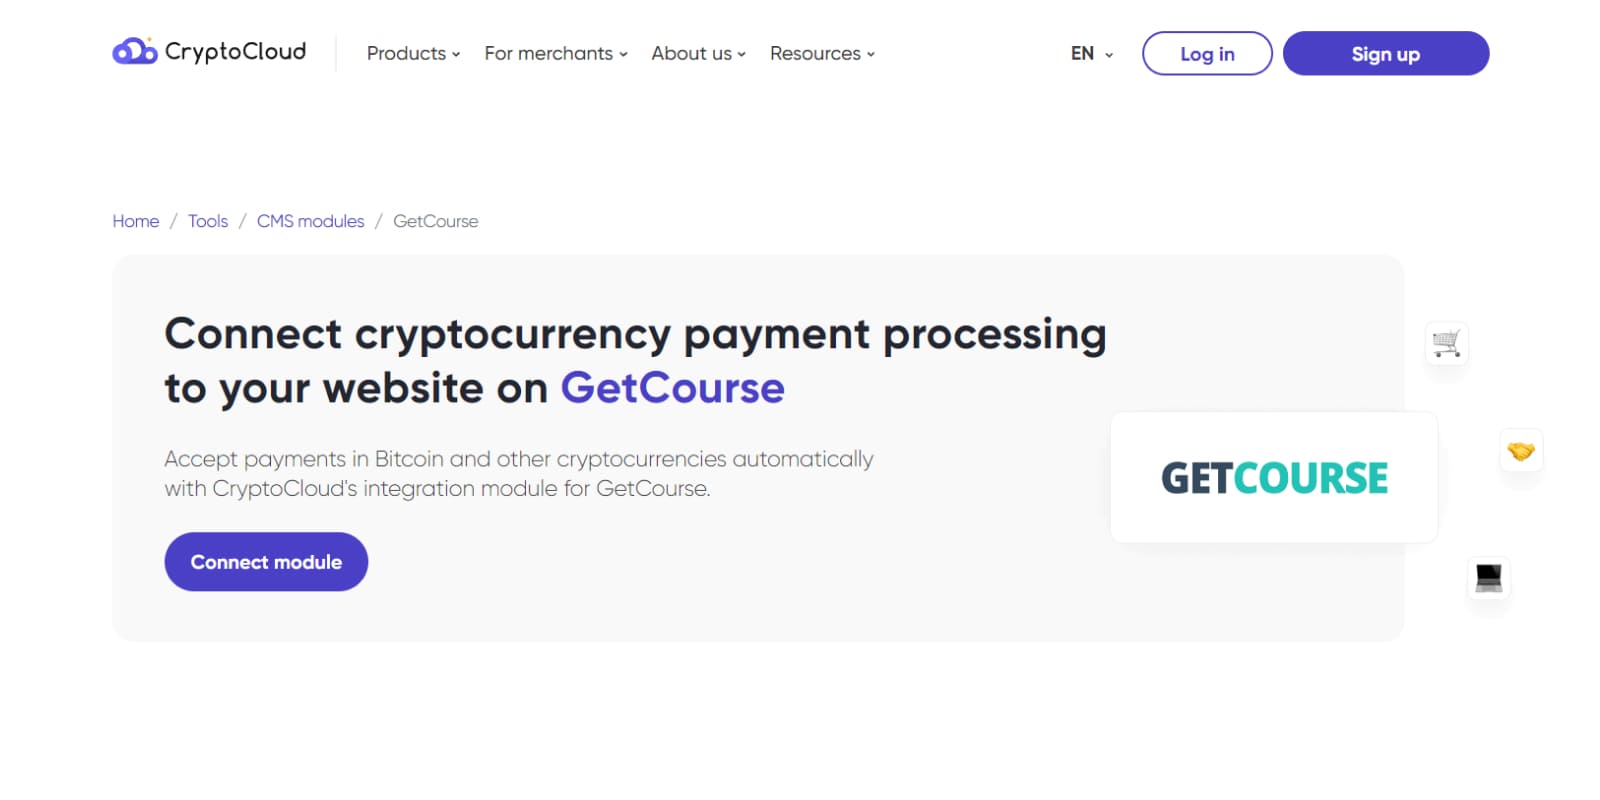 GetCourse users can integrate secure cryptocurrency payments with CryptoCloud.